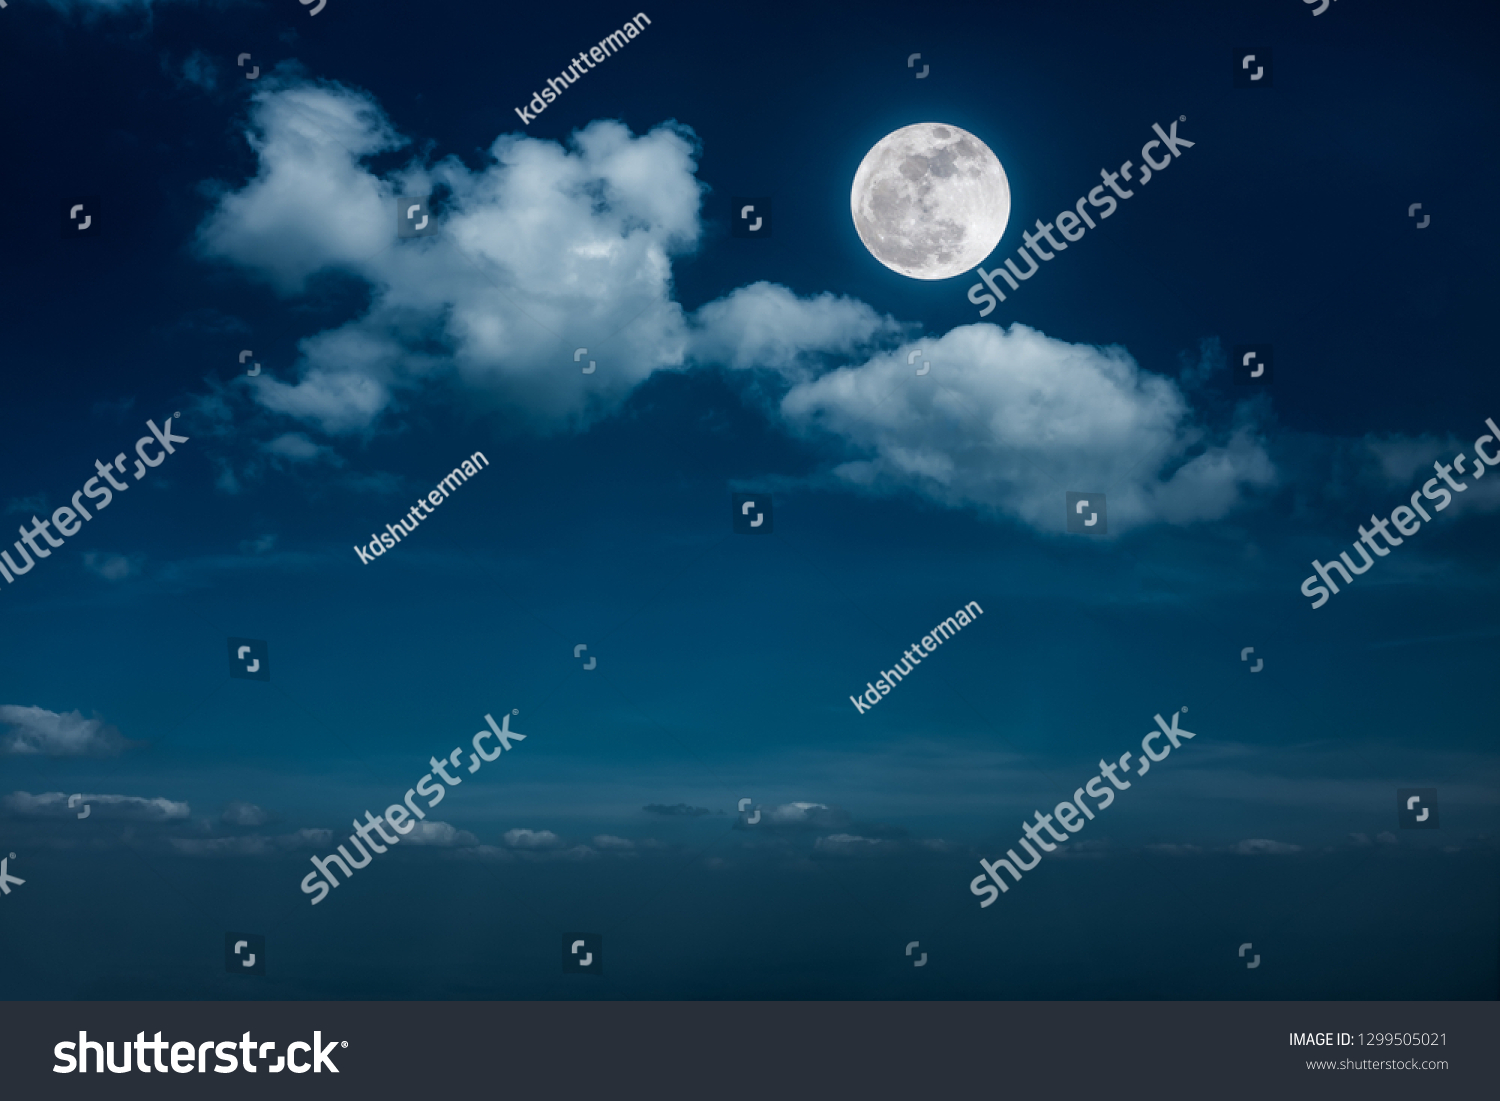 Beautiful skyscape. Landscape of night sky with clouds and bright full moon. Serenity nature background, outdoor at nighttime with moonlight. The moon taken with my own camera. #1299505021